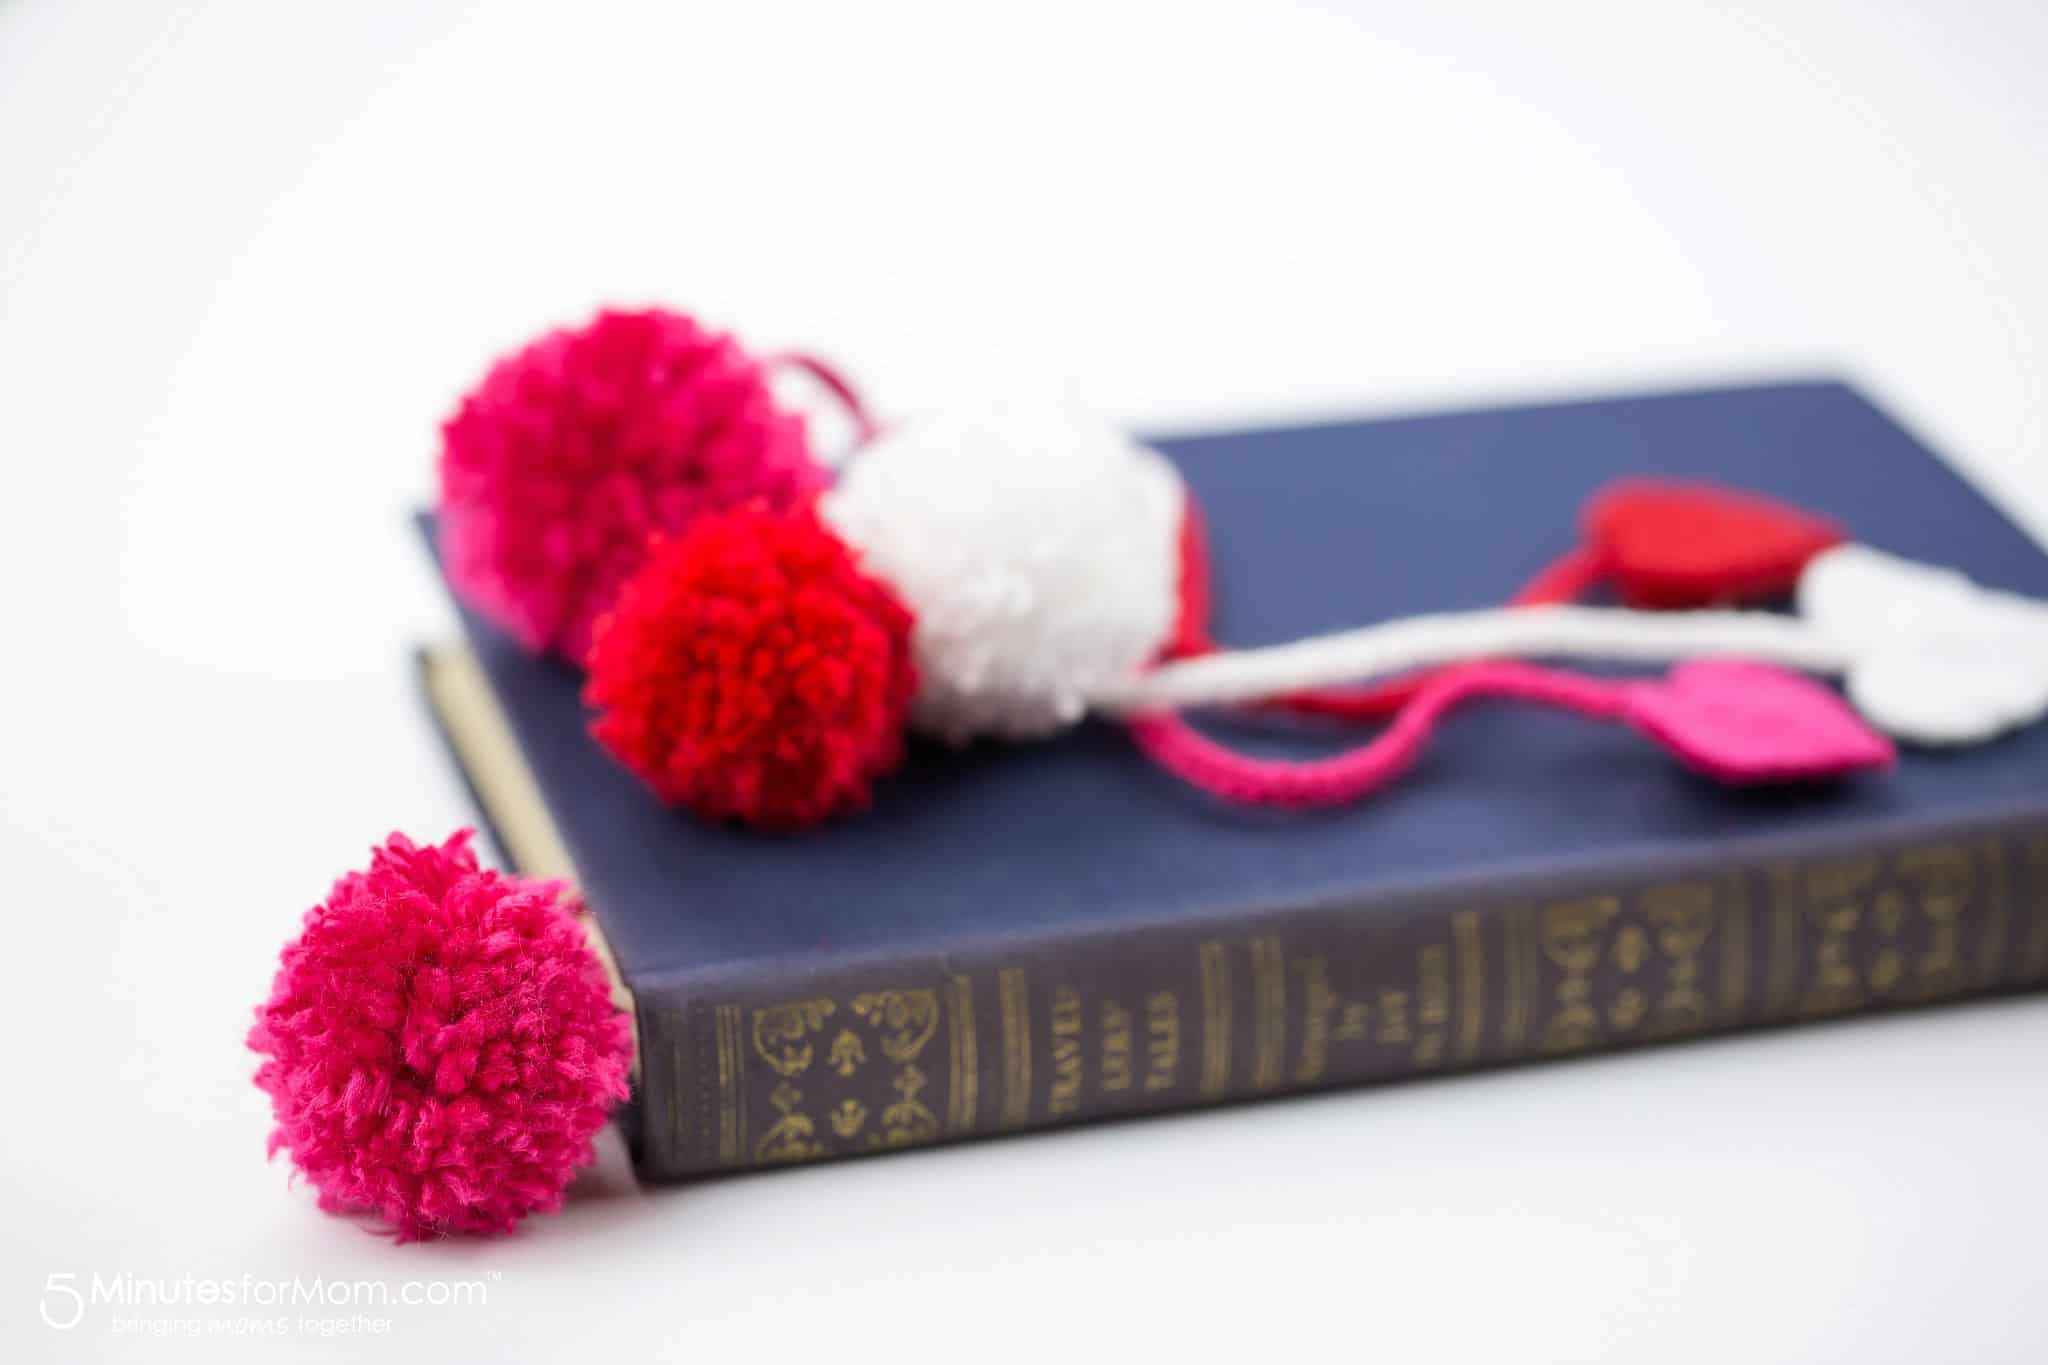 Sideview photo of a navy blue hard cover book with a pink pom pom bookmark inside of it. Resting on top of the book are white, red and pink pom pom bookmarks with felt hearts.